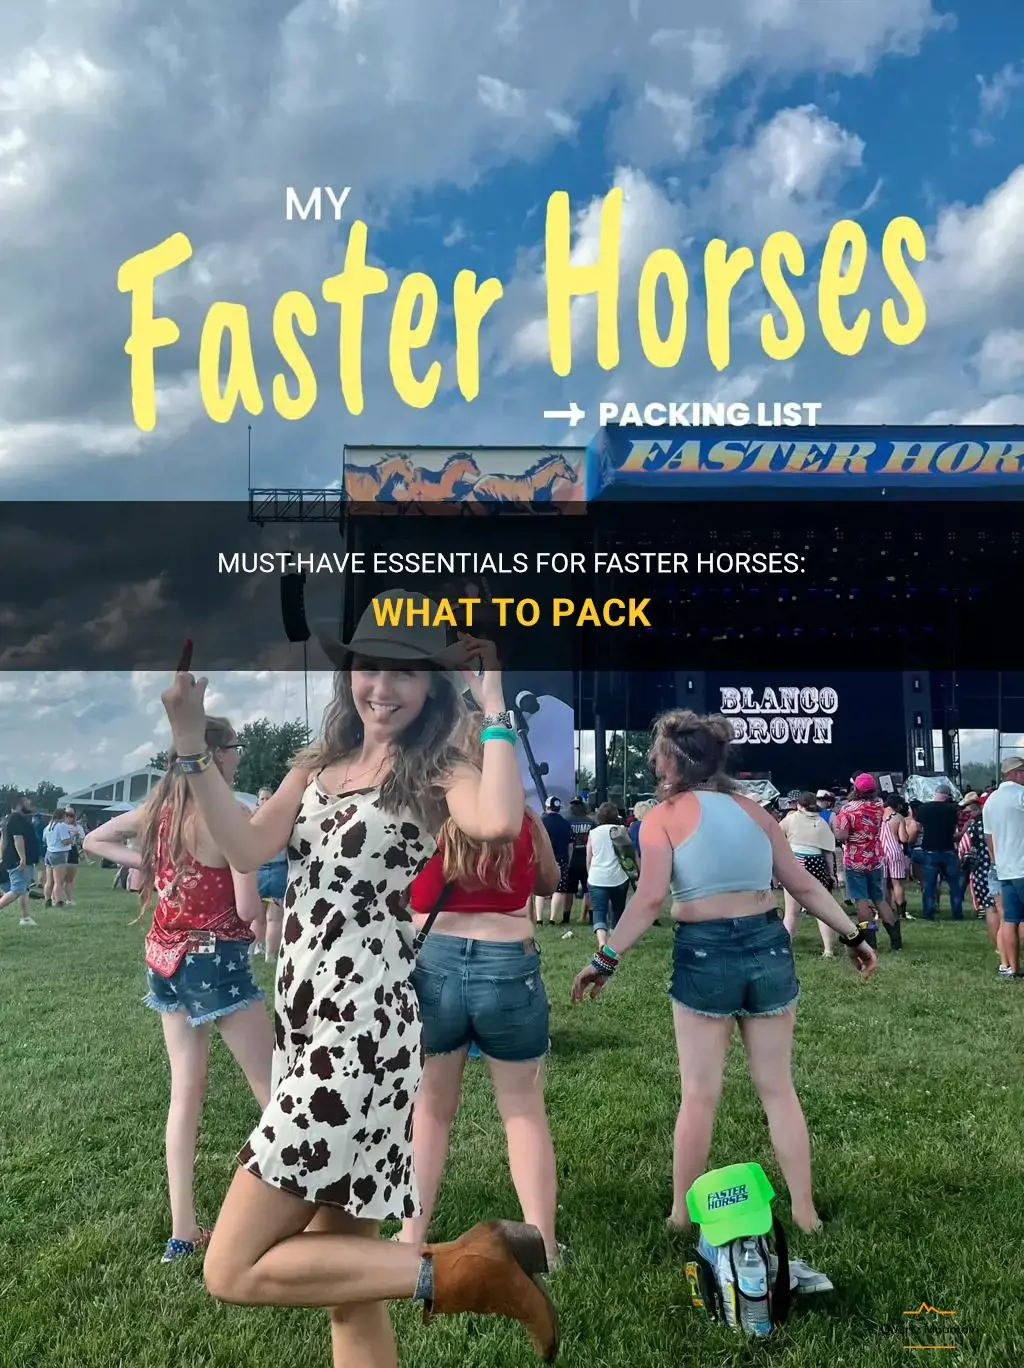 what to pack for faster horses